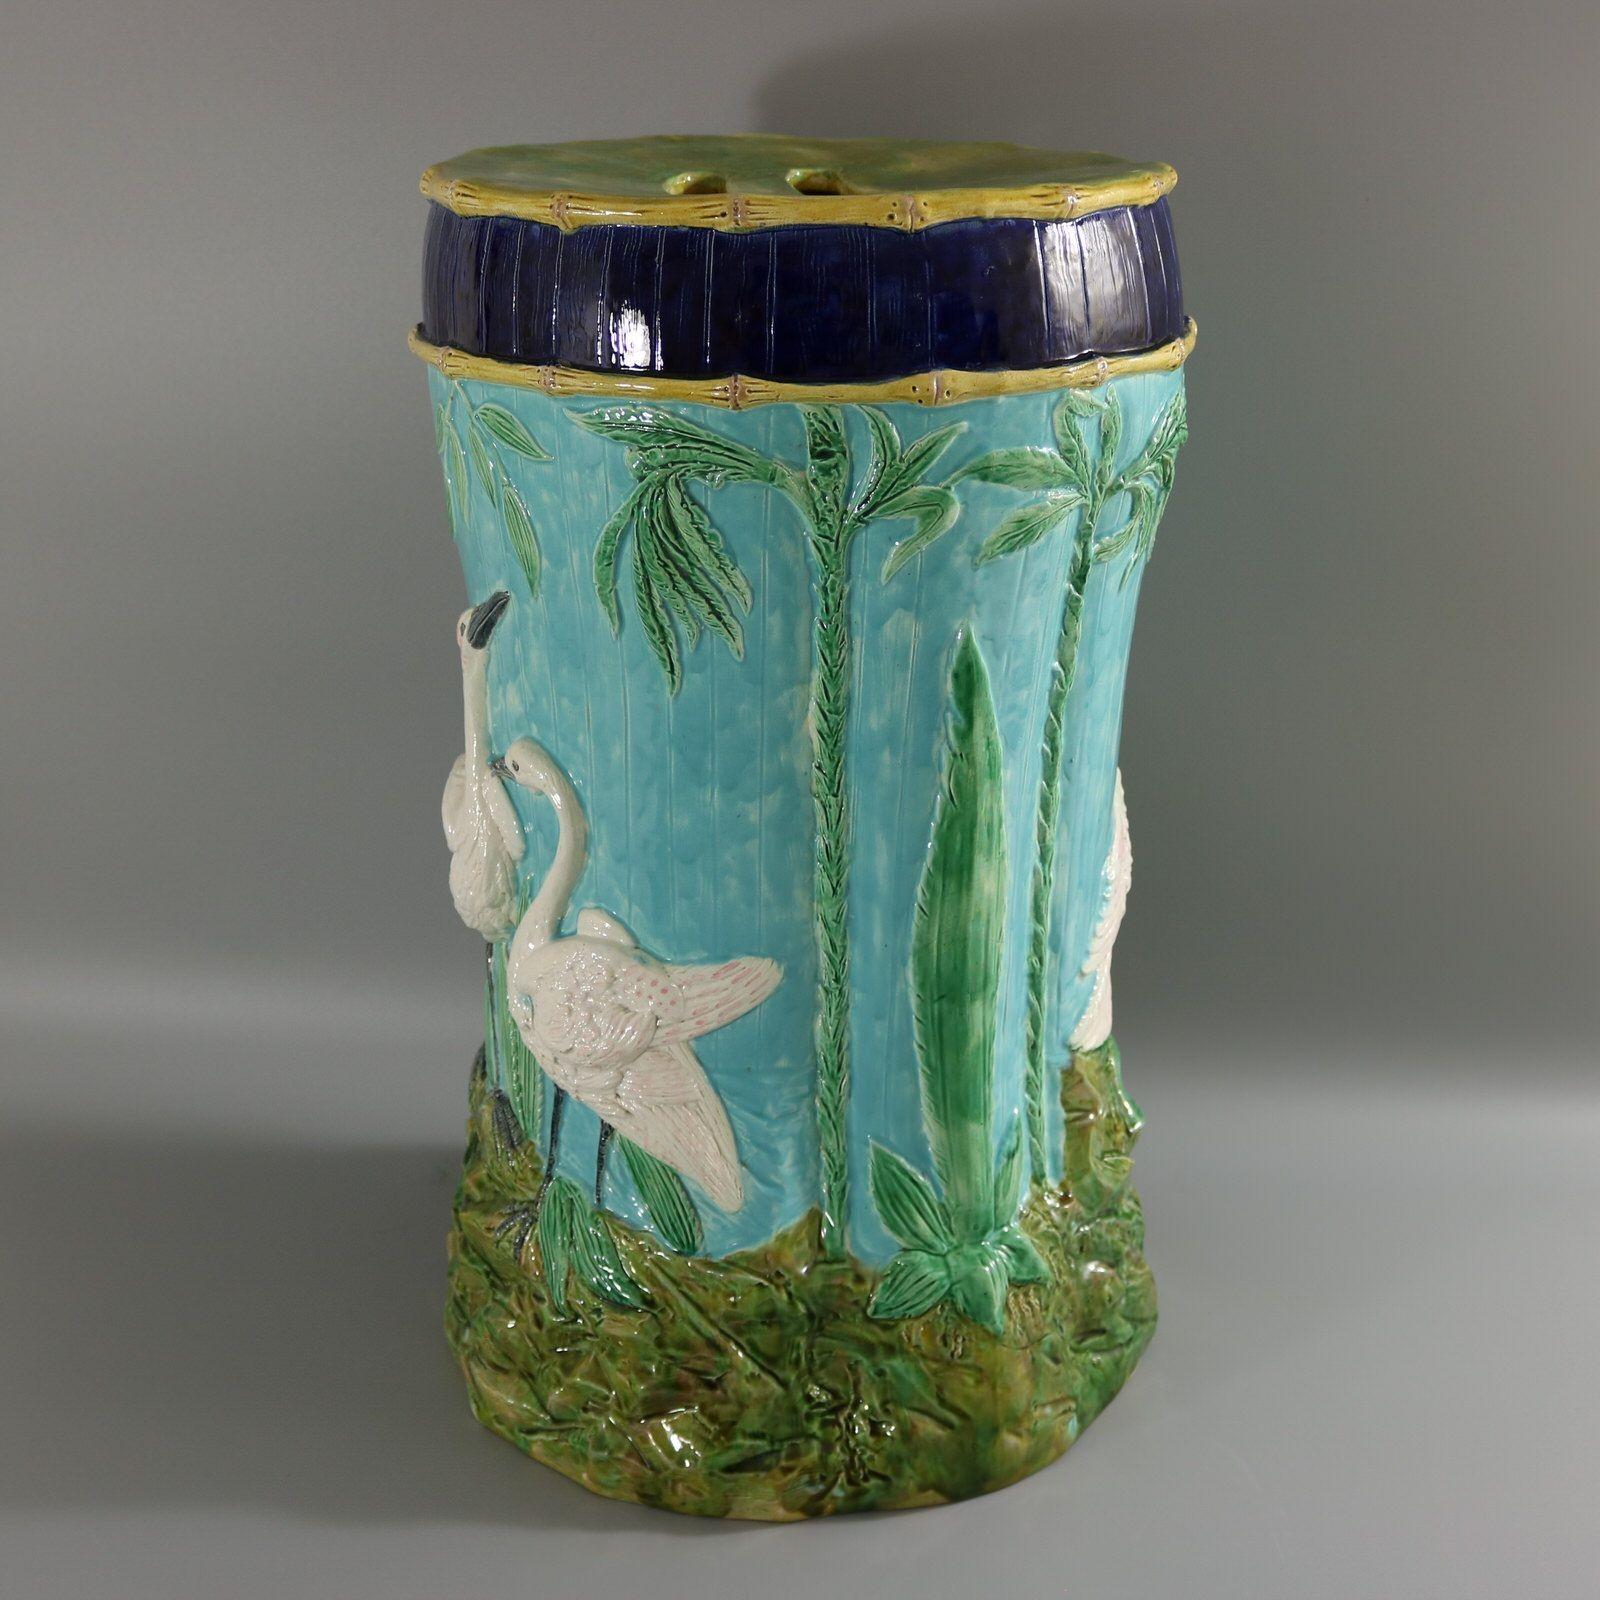 Thomas Forester Majolica Stork Garden Seat which features storks stood on rocky ground with bamboo decoration. Turquoise ground version. Colouration: turquoise, green, white, are predominant.